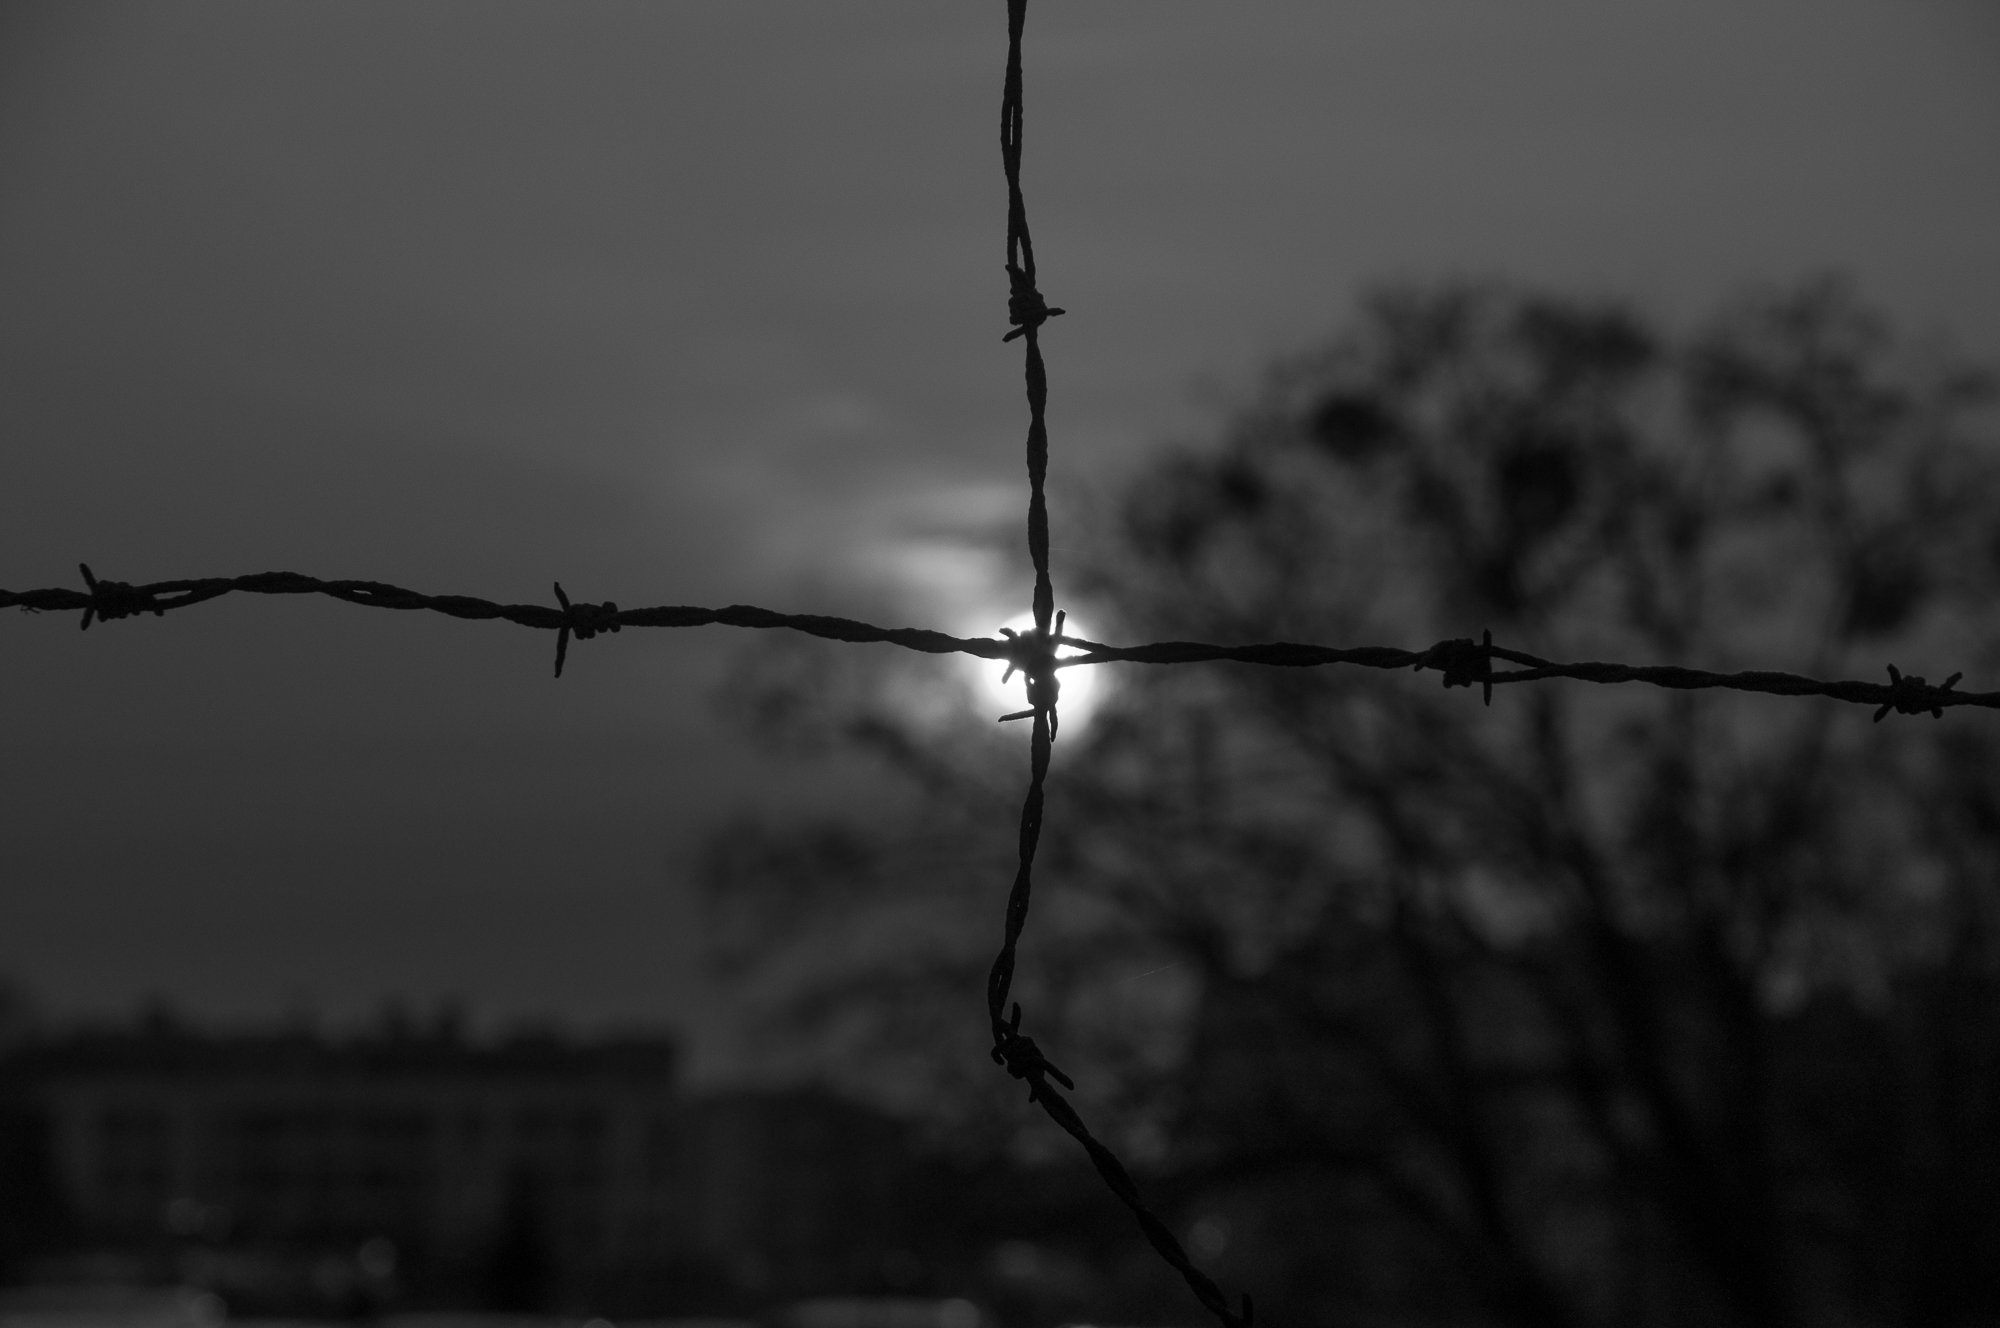 Adam Mazek Photography Warsaw 2021. Post: "About the Universe." Minimalism. Sund and barbed wire.